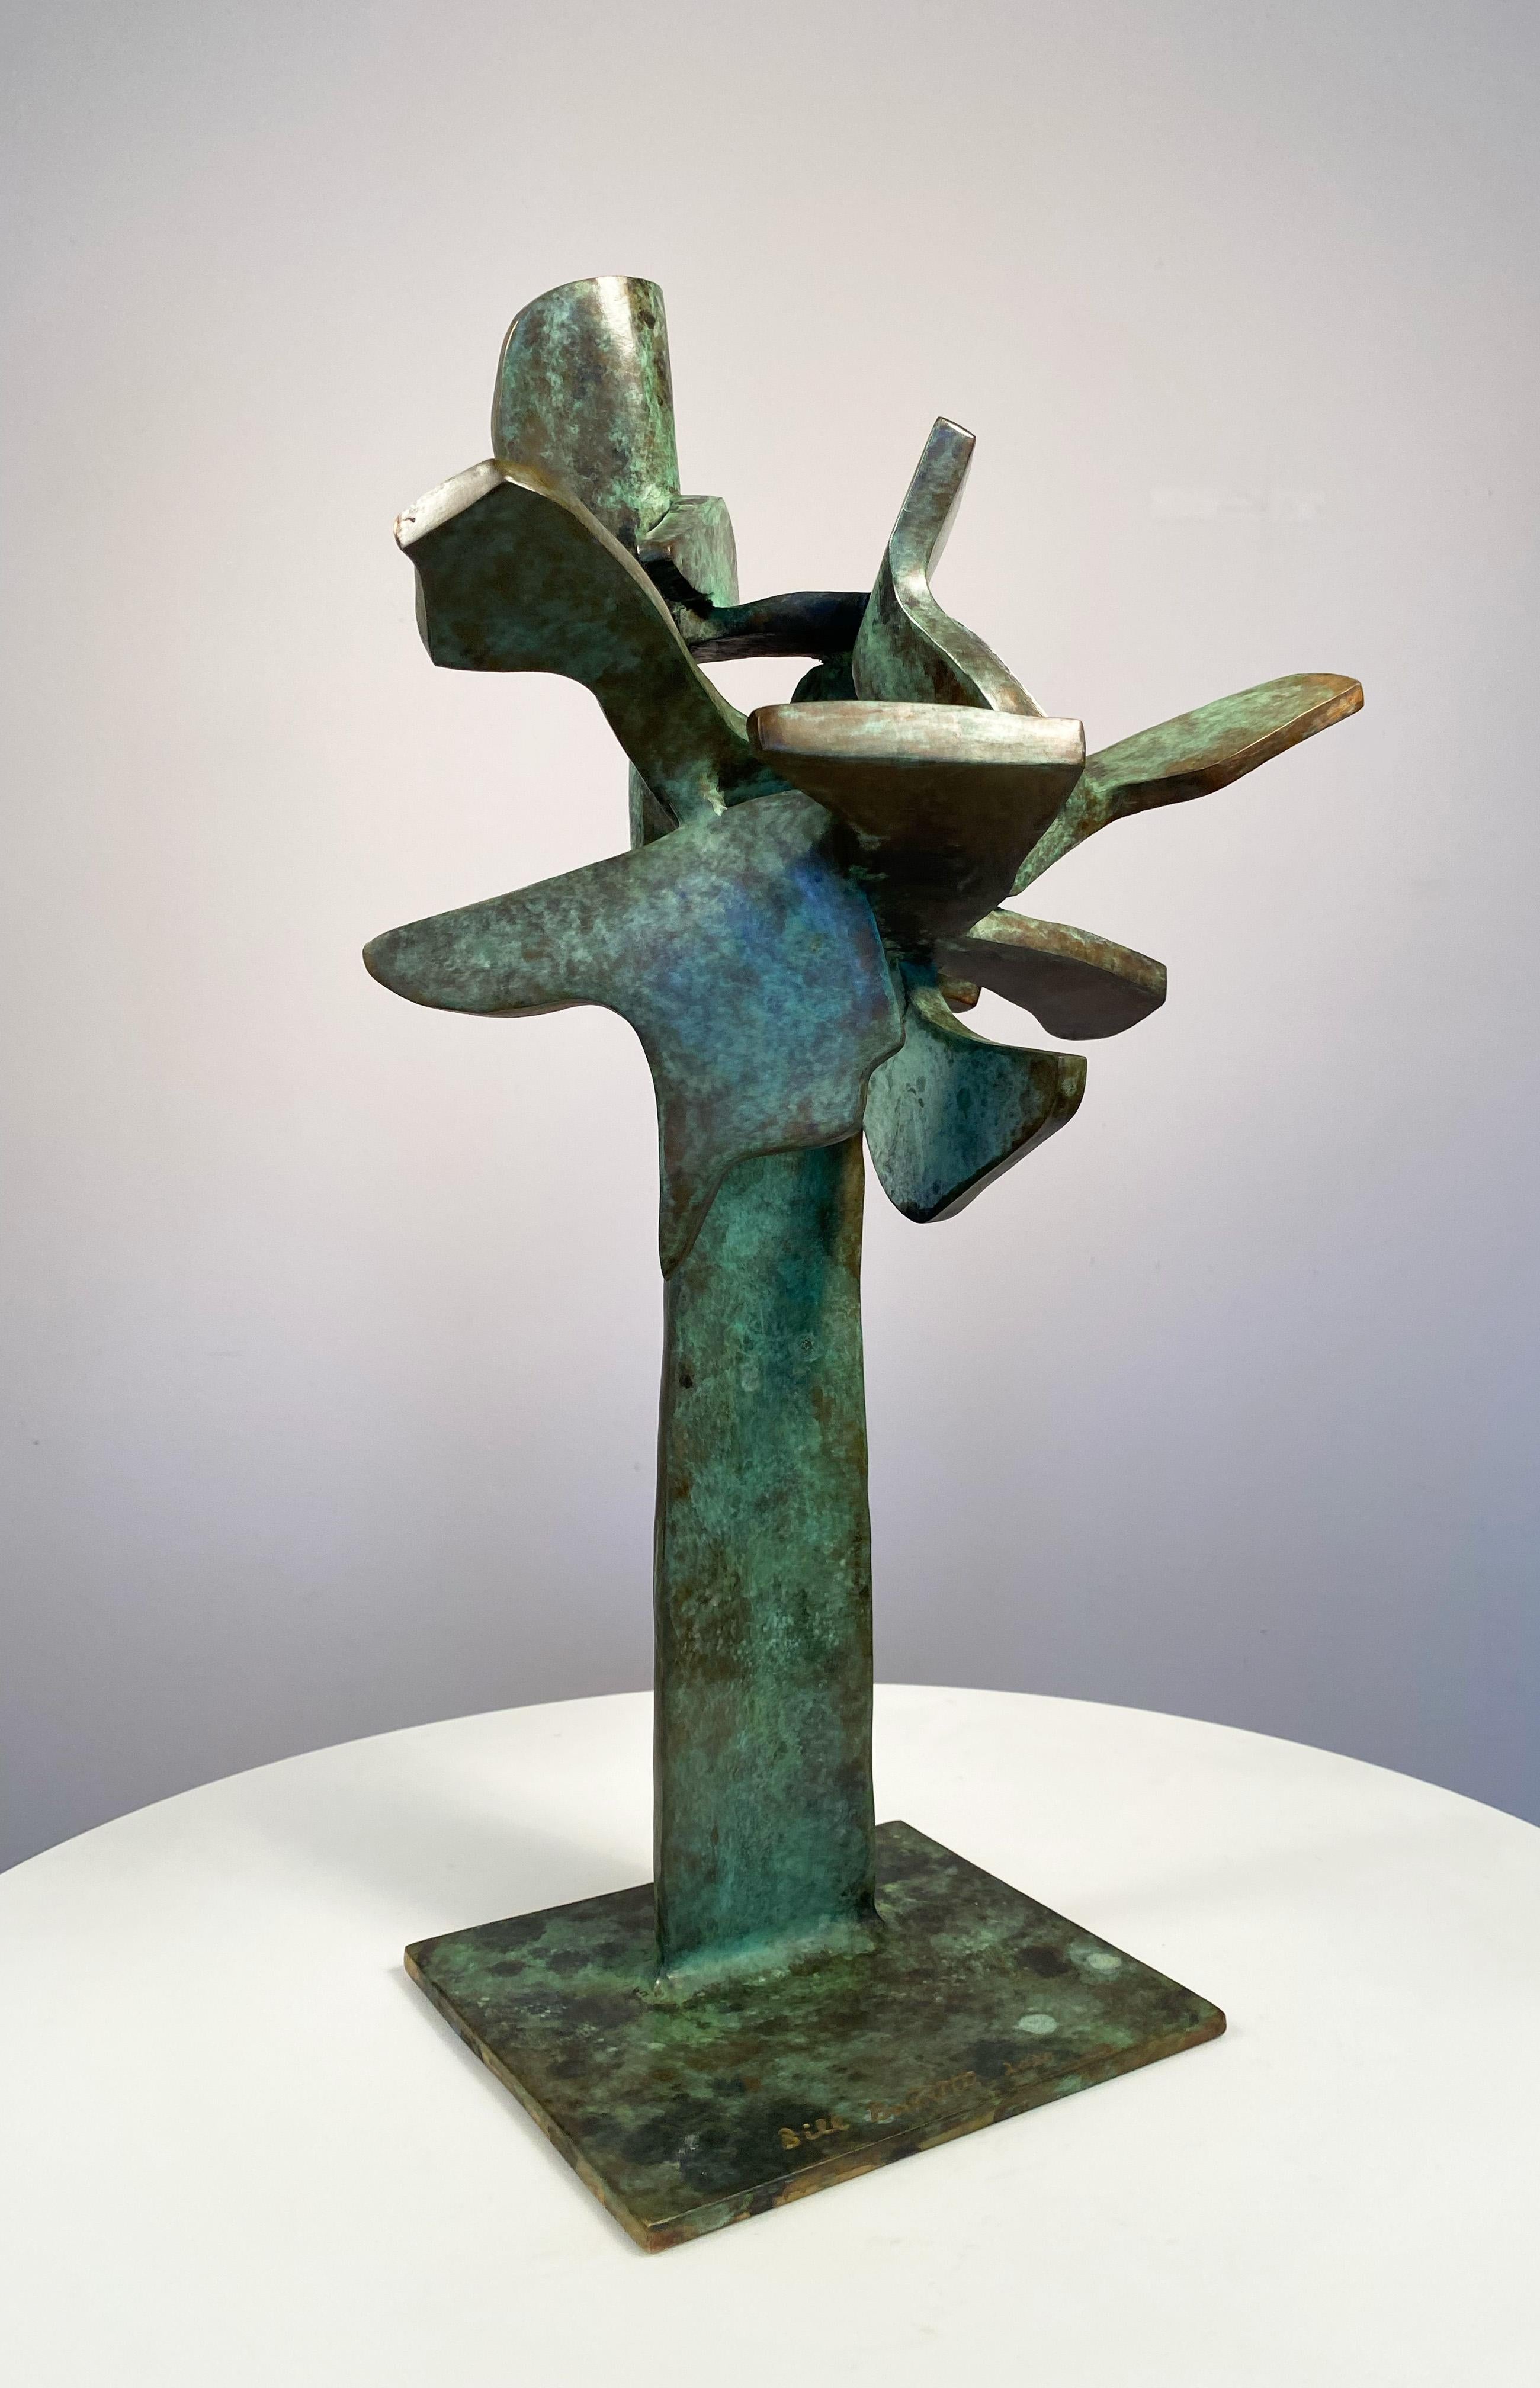 Barrett is one of America's outstanding living sculptors.  A sculptor who works on large scale and major commission and outdoor works, his smaller indoor maquettes have been avidly collected.  A beautiful green  patina on this organic form work that